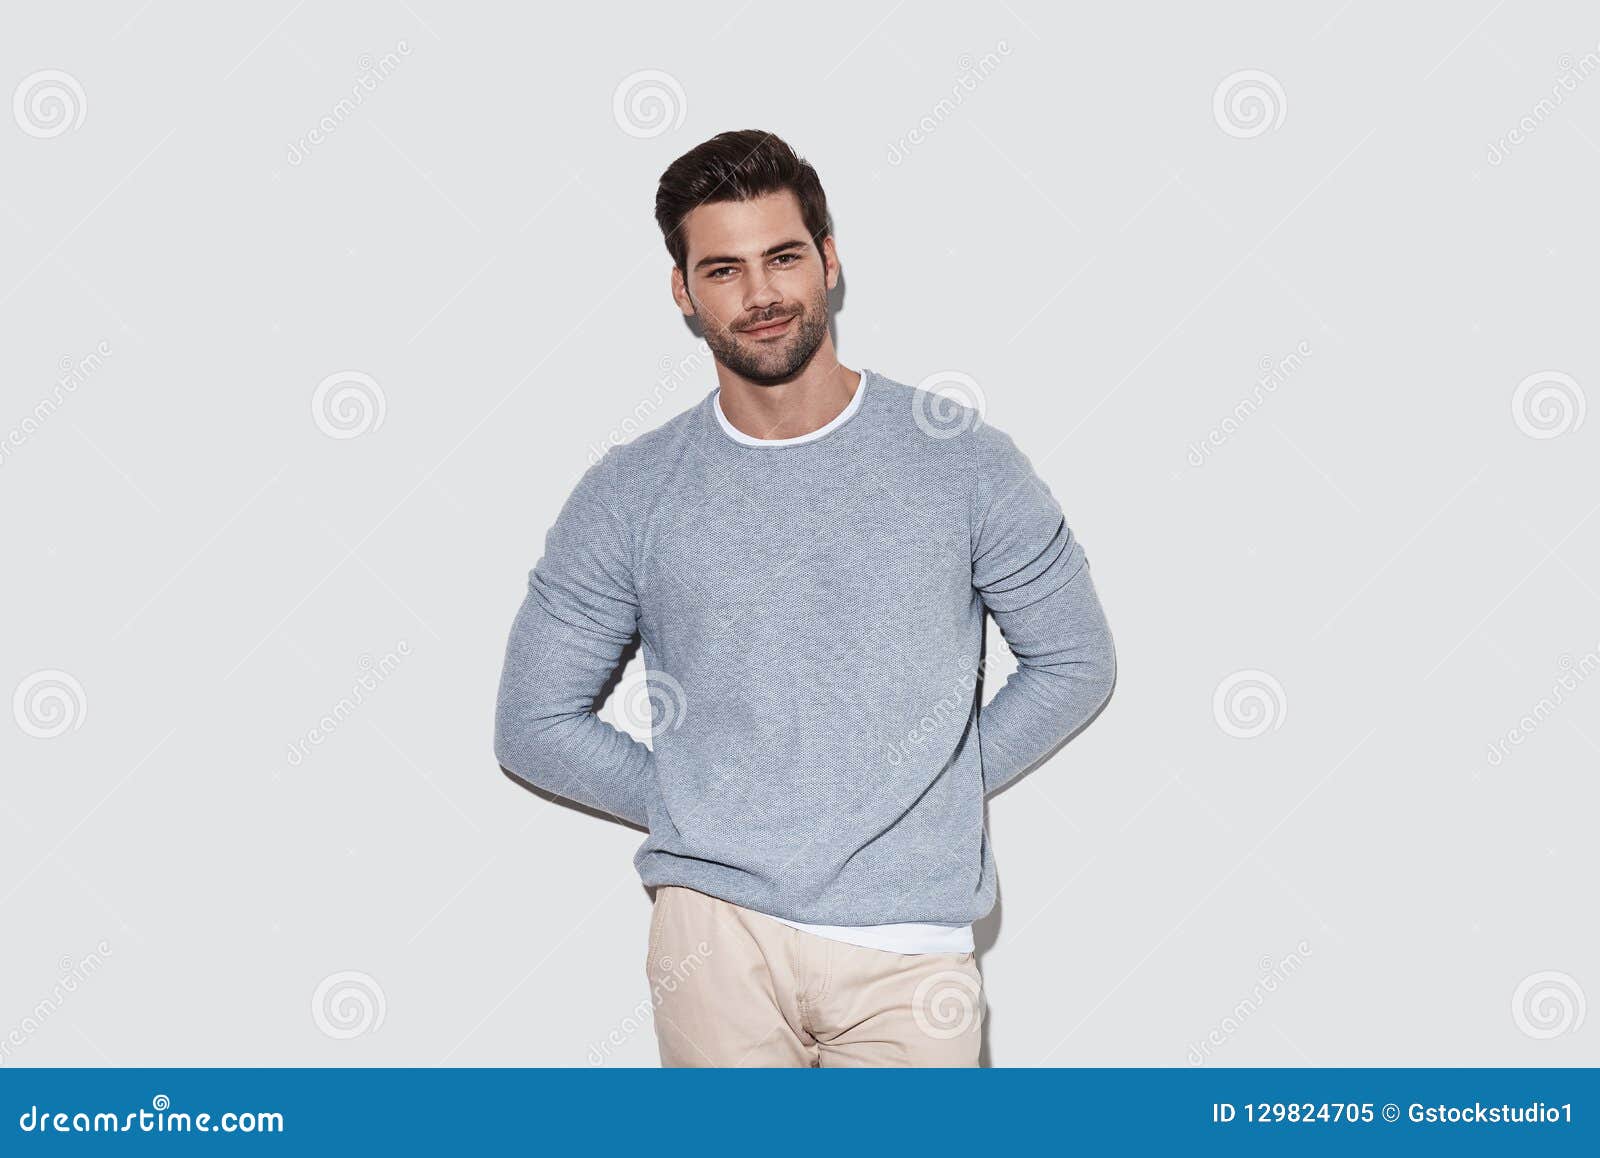 Charming man. stock image. Image of caucasian, candid - 129824705